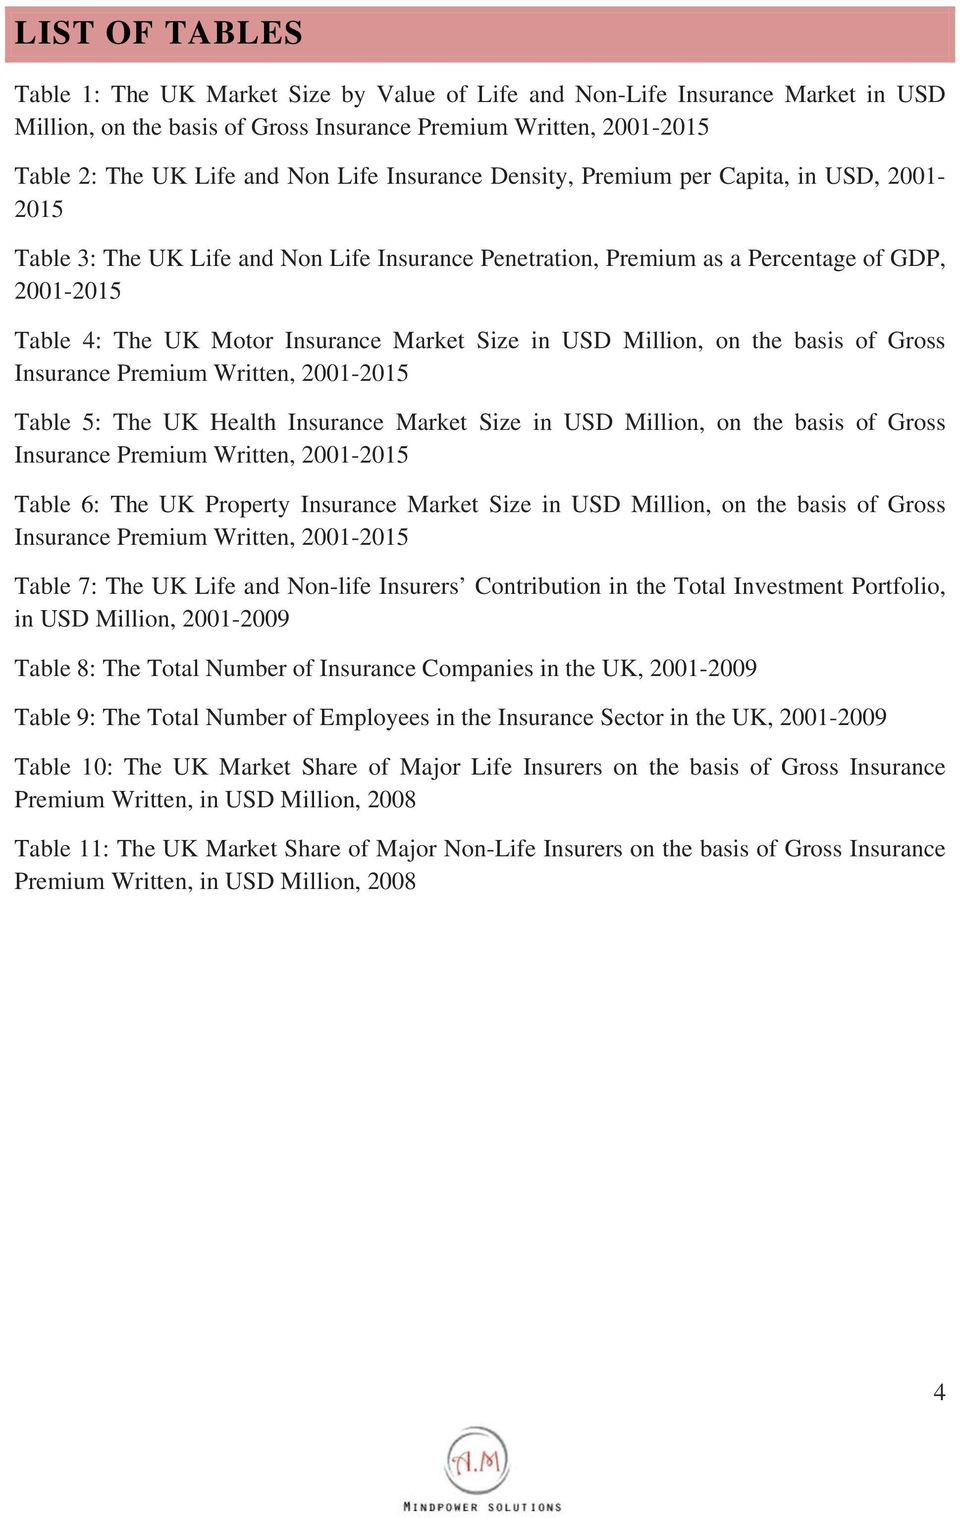 Table 5: The UK Health Insurance Market Size in USD Million, on the basis of Gross Table 6: The UK Property Insurance Market Size in USD Million, on the basis of Gross Table 7: The UK Life and